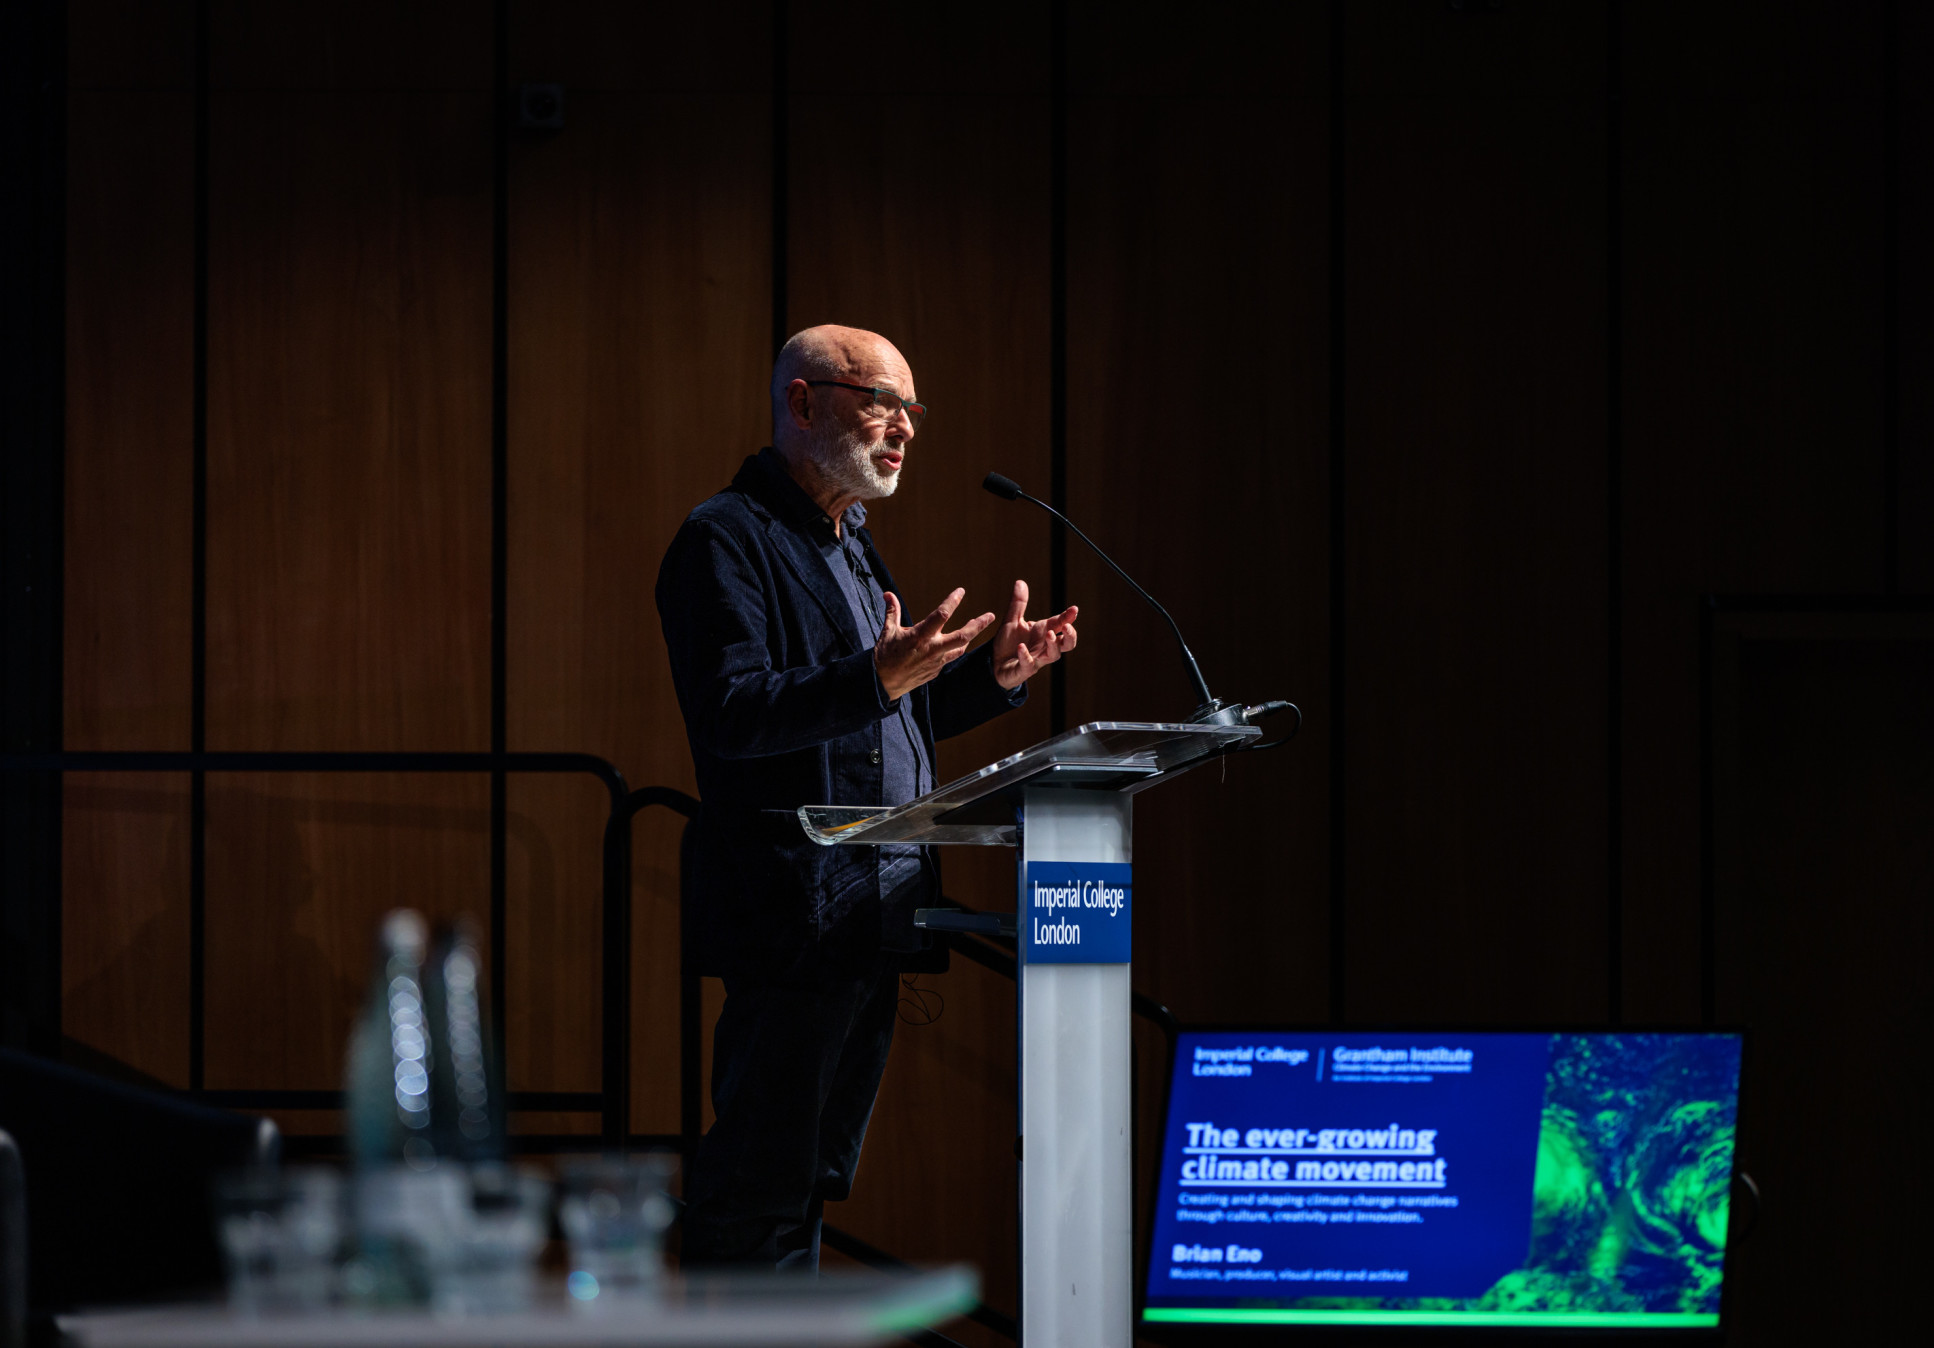  Brian Eno addresses the audience at Imperial College London, where he called for the creative industries to use their skills in story-telling and inspiring change, to help scientists better communicate the urgency of climate action.